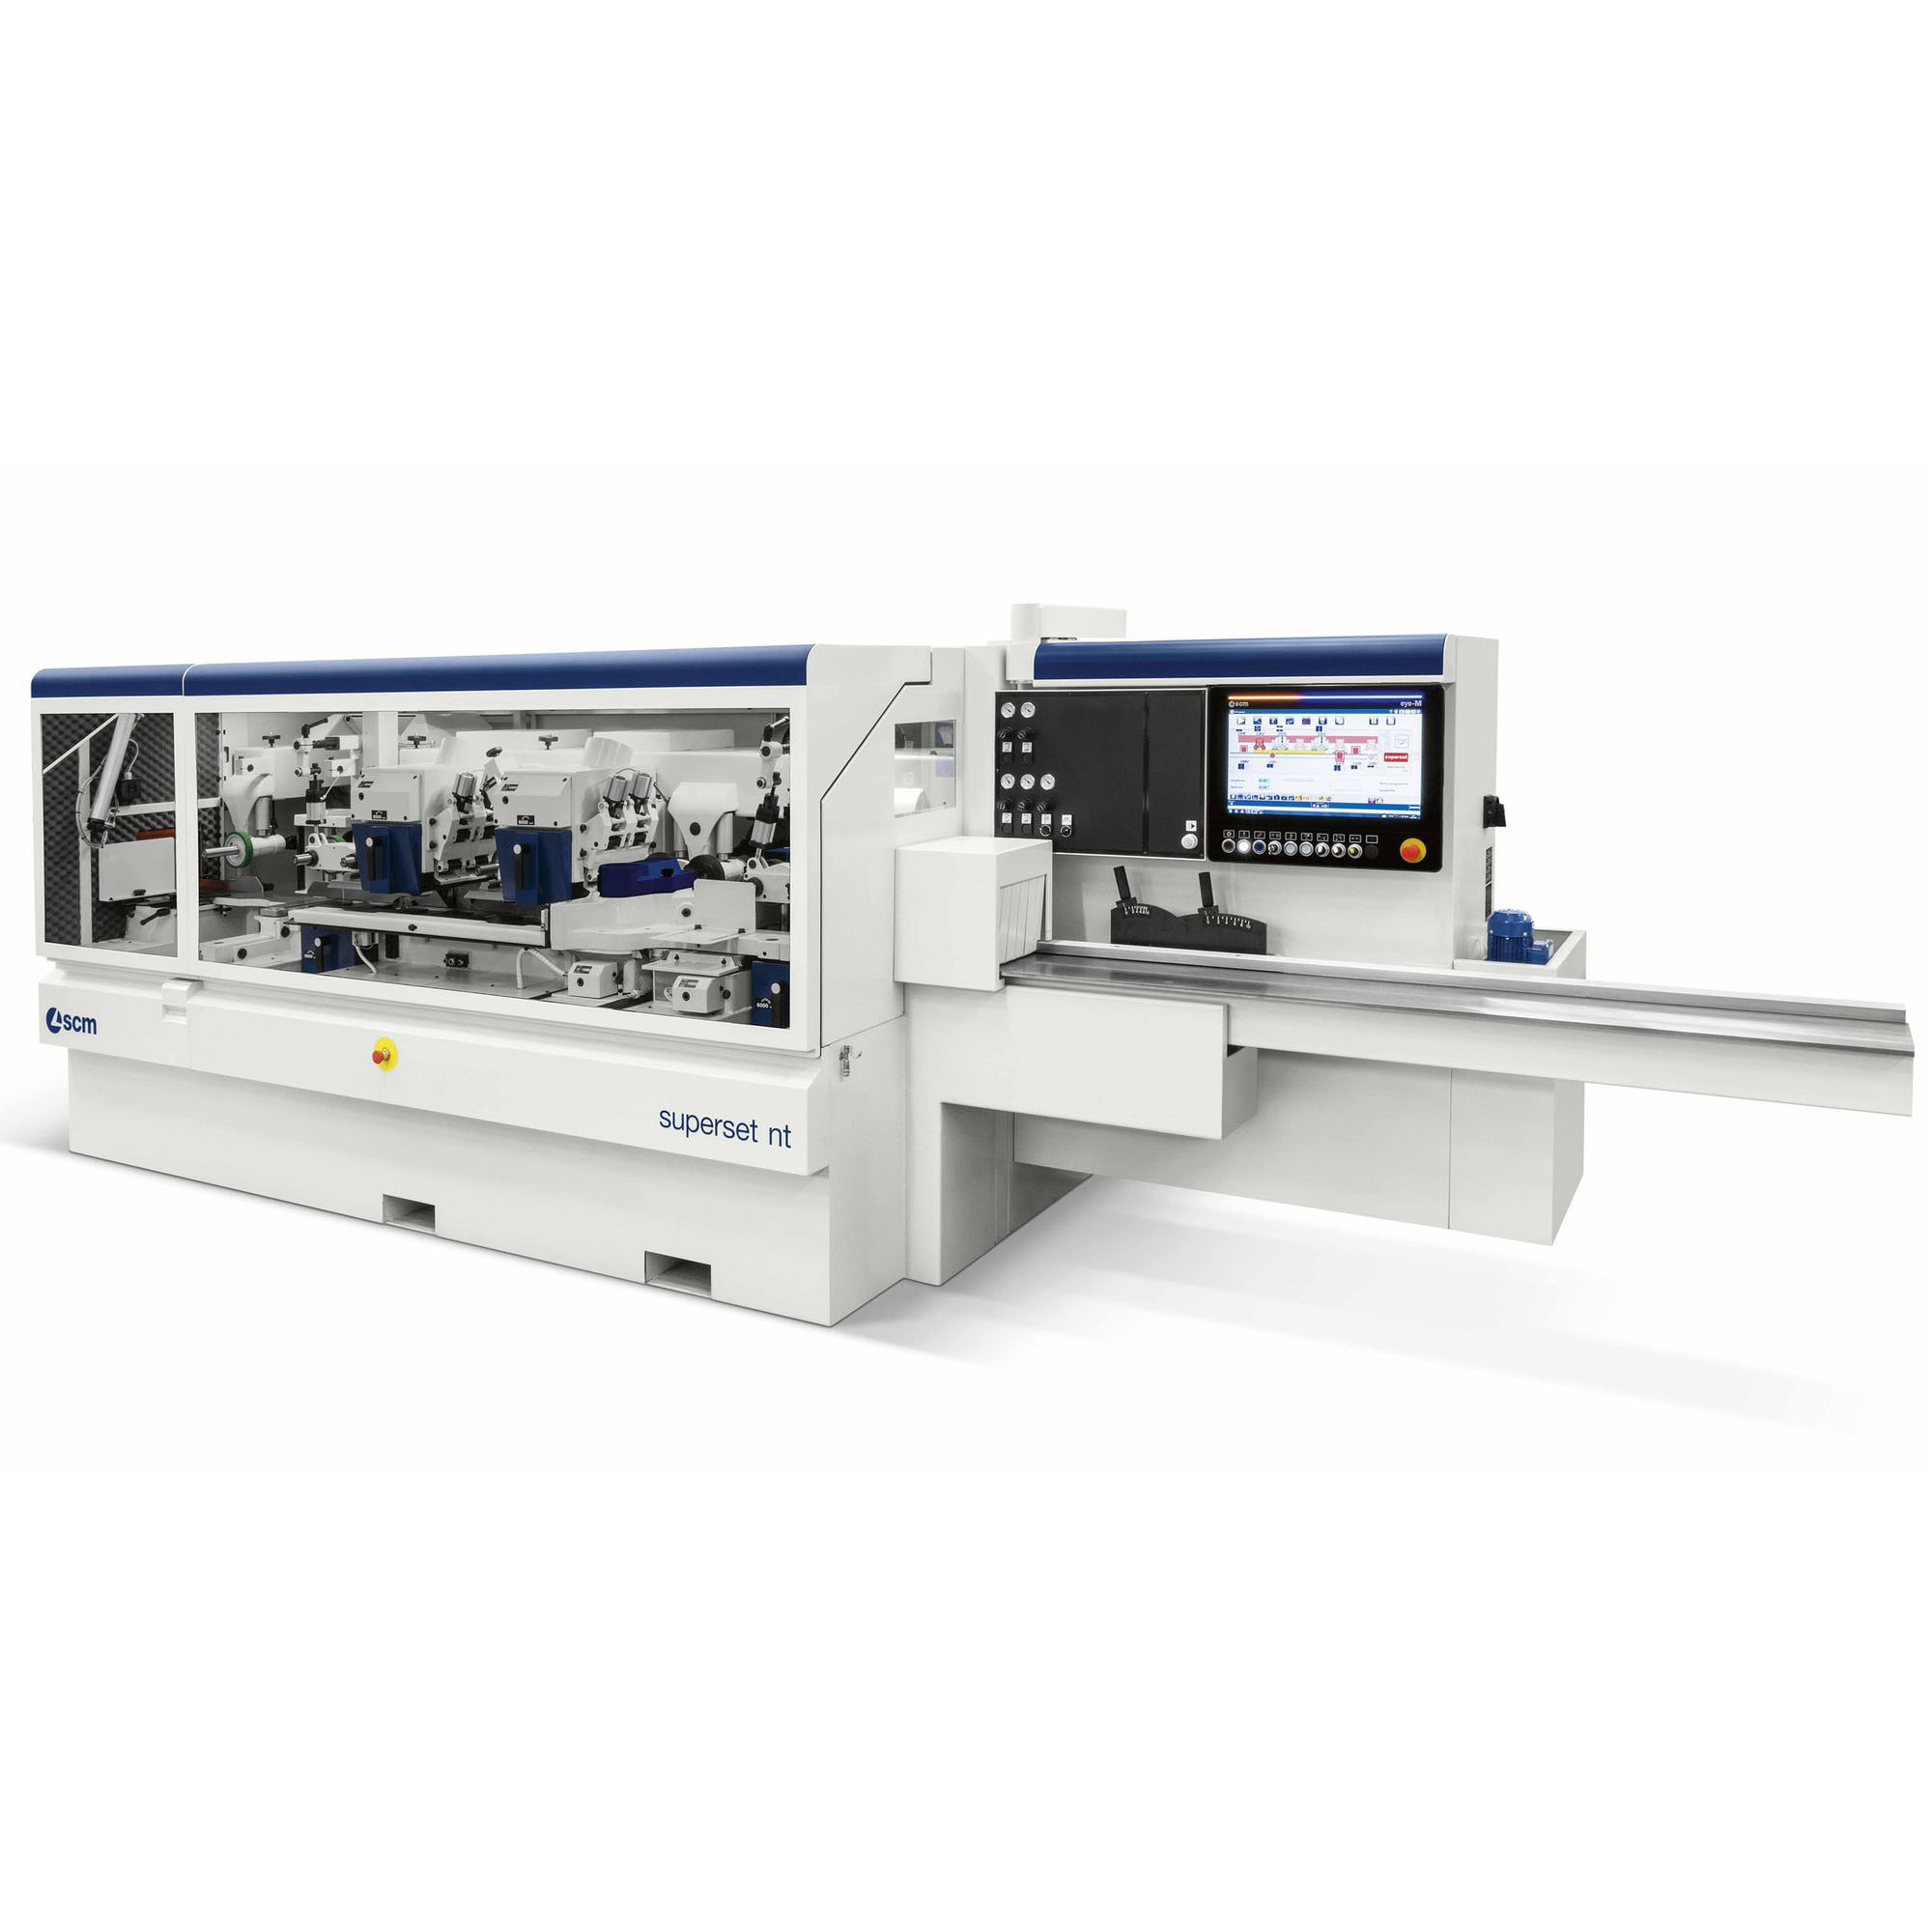 Scm Automatic Throughfeed Moulder Model: Superset Nt